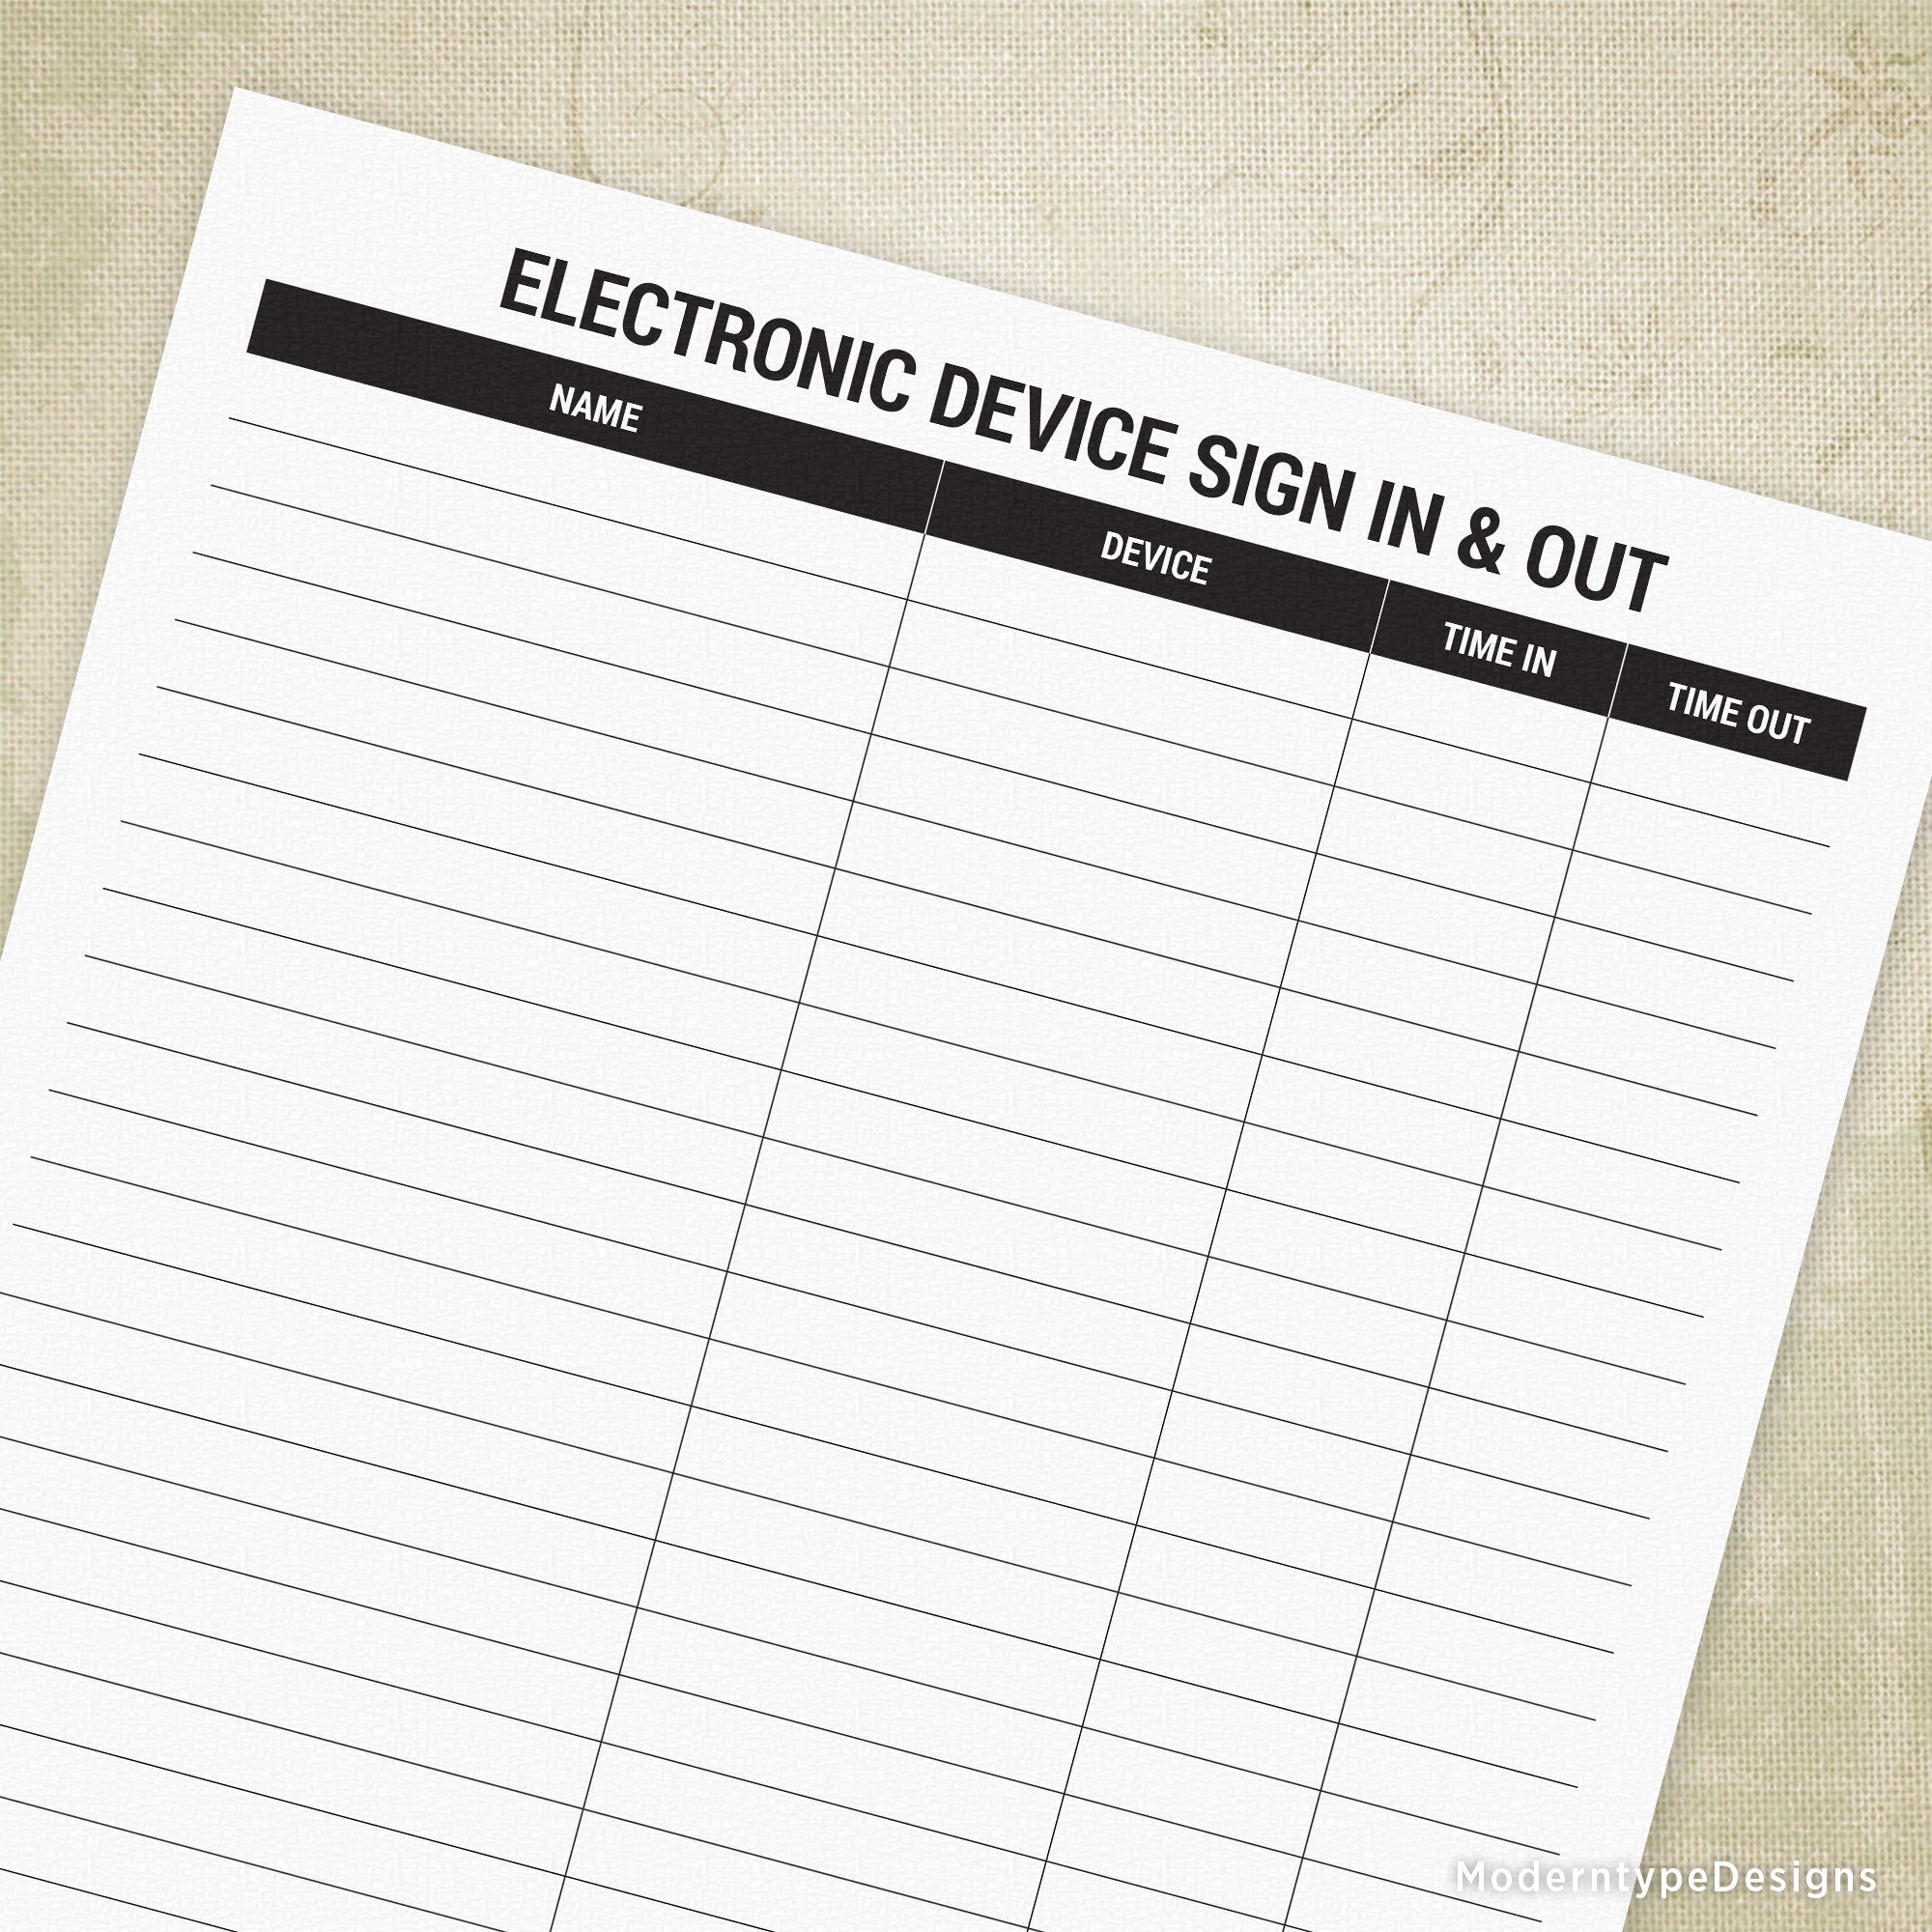 Electronic Device Sign In & Out Printable Form